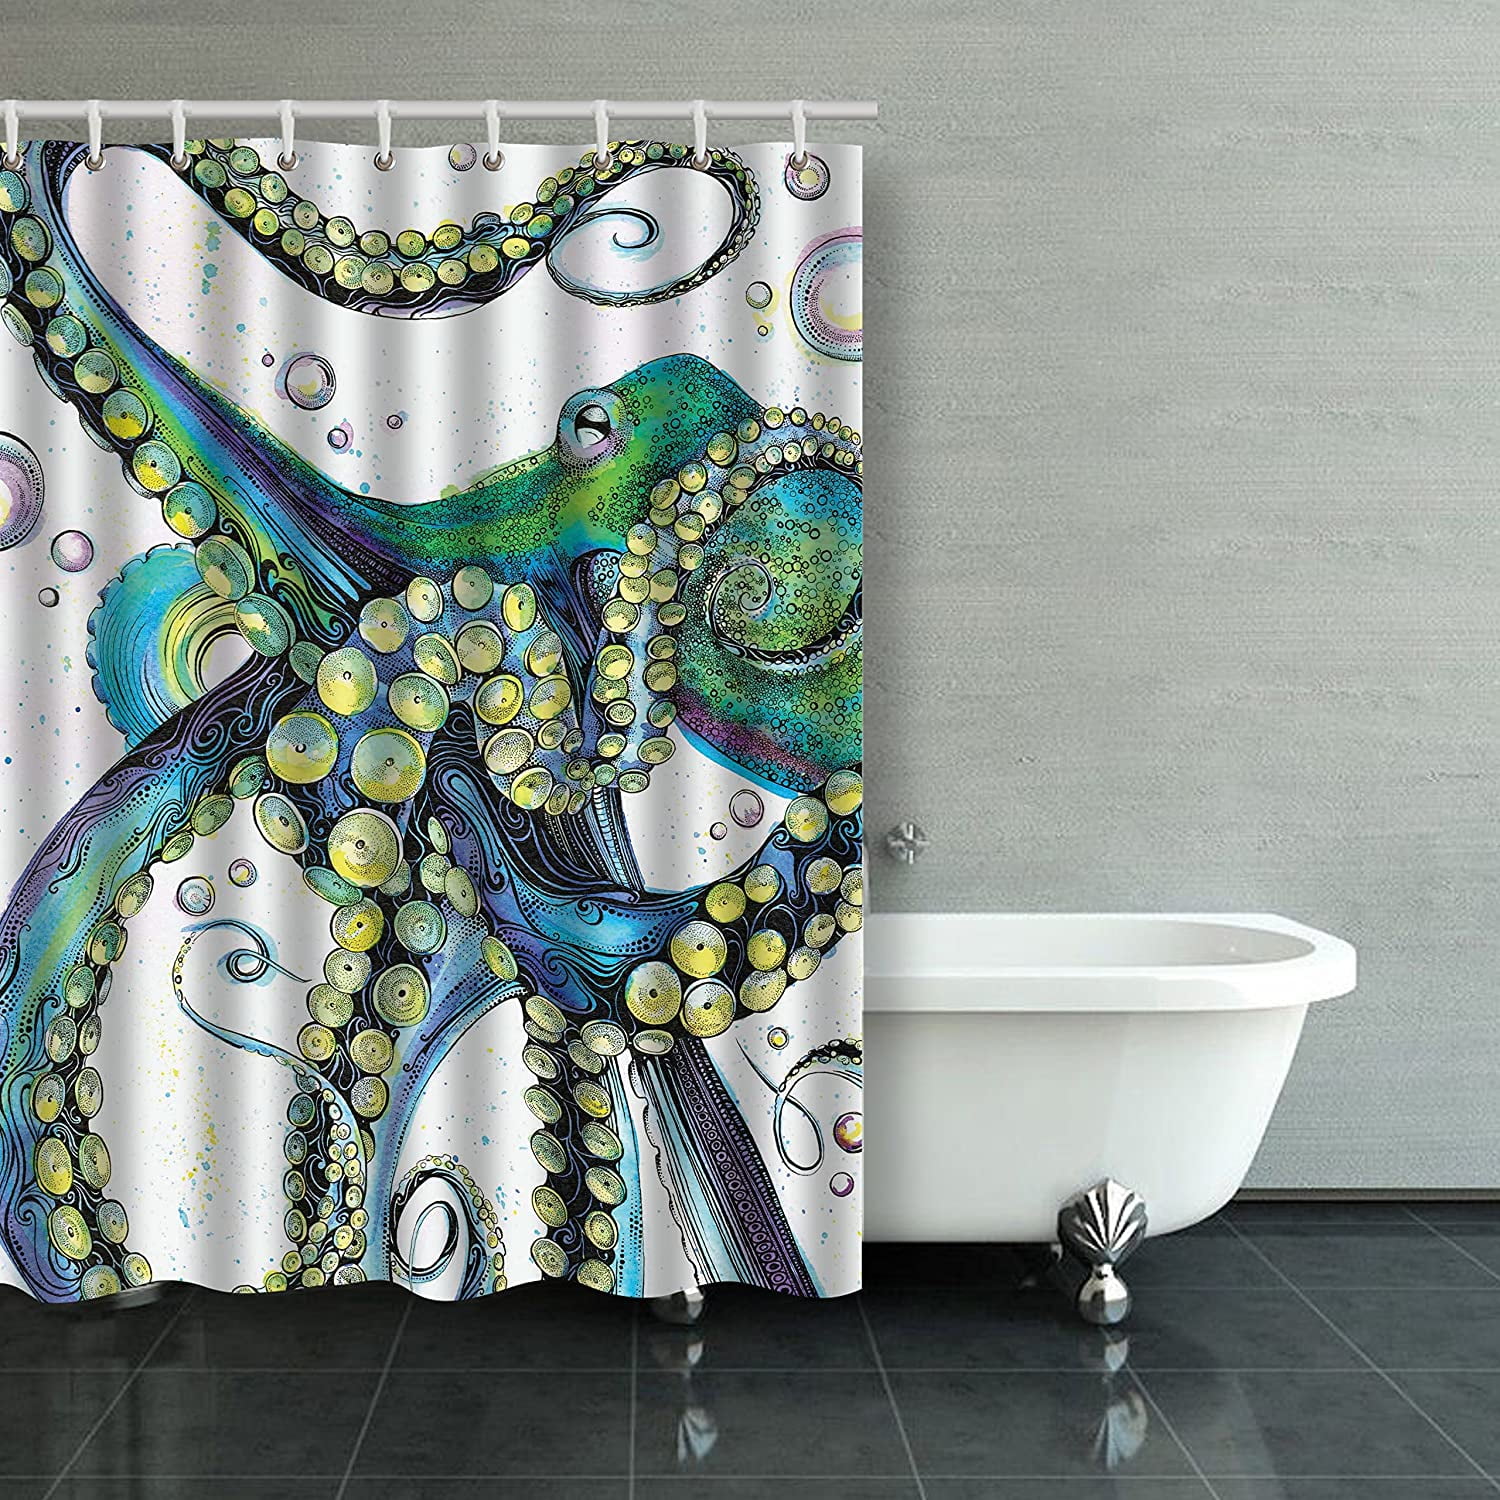 Details about   Retro Painting Yellow Giant Octopus Waterproof Polyester Shower Curtain Set 72" 